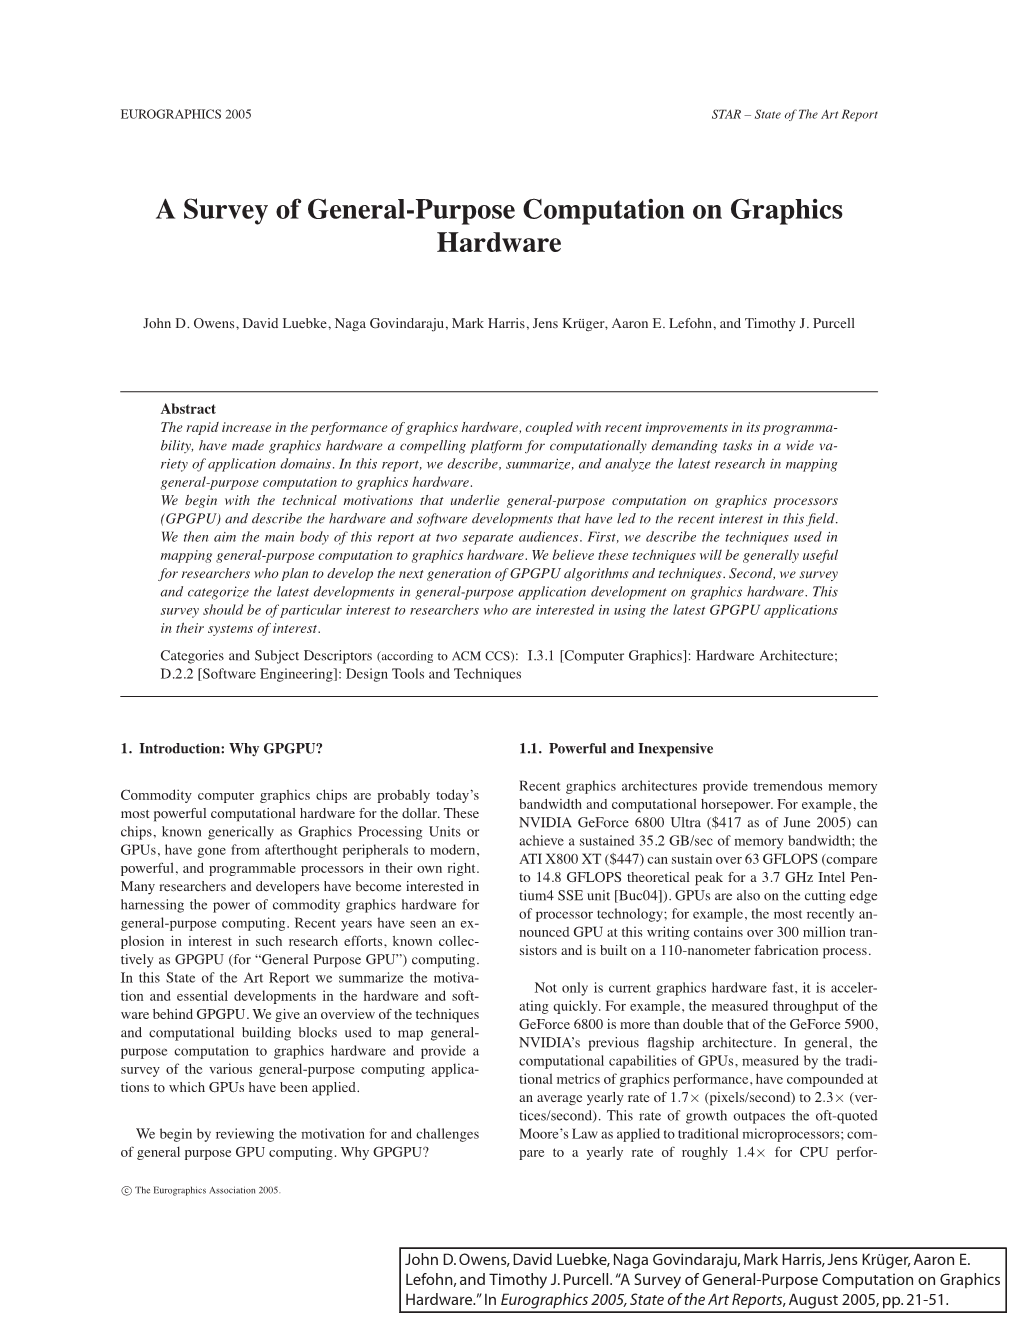 A Survey of General-Purpose Computation on Graphics Hardware